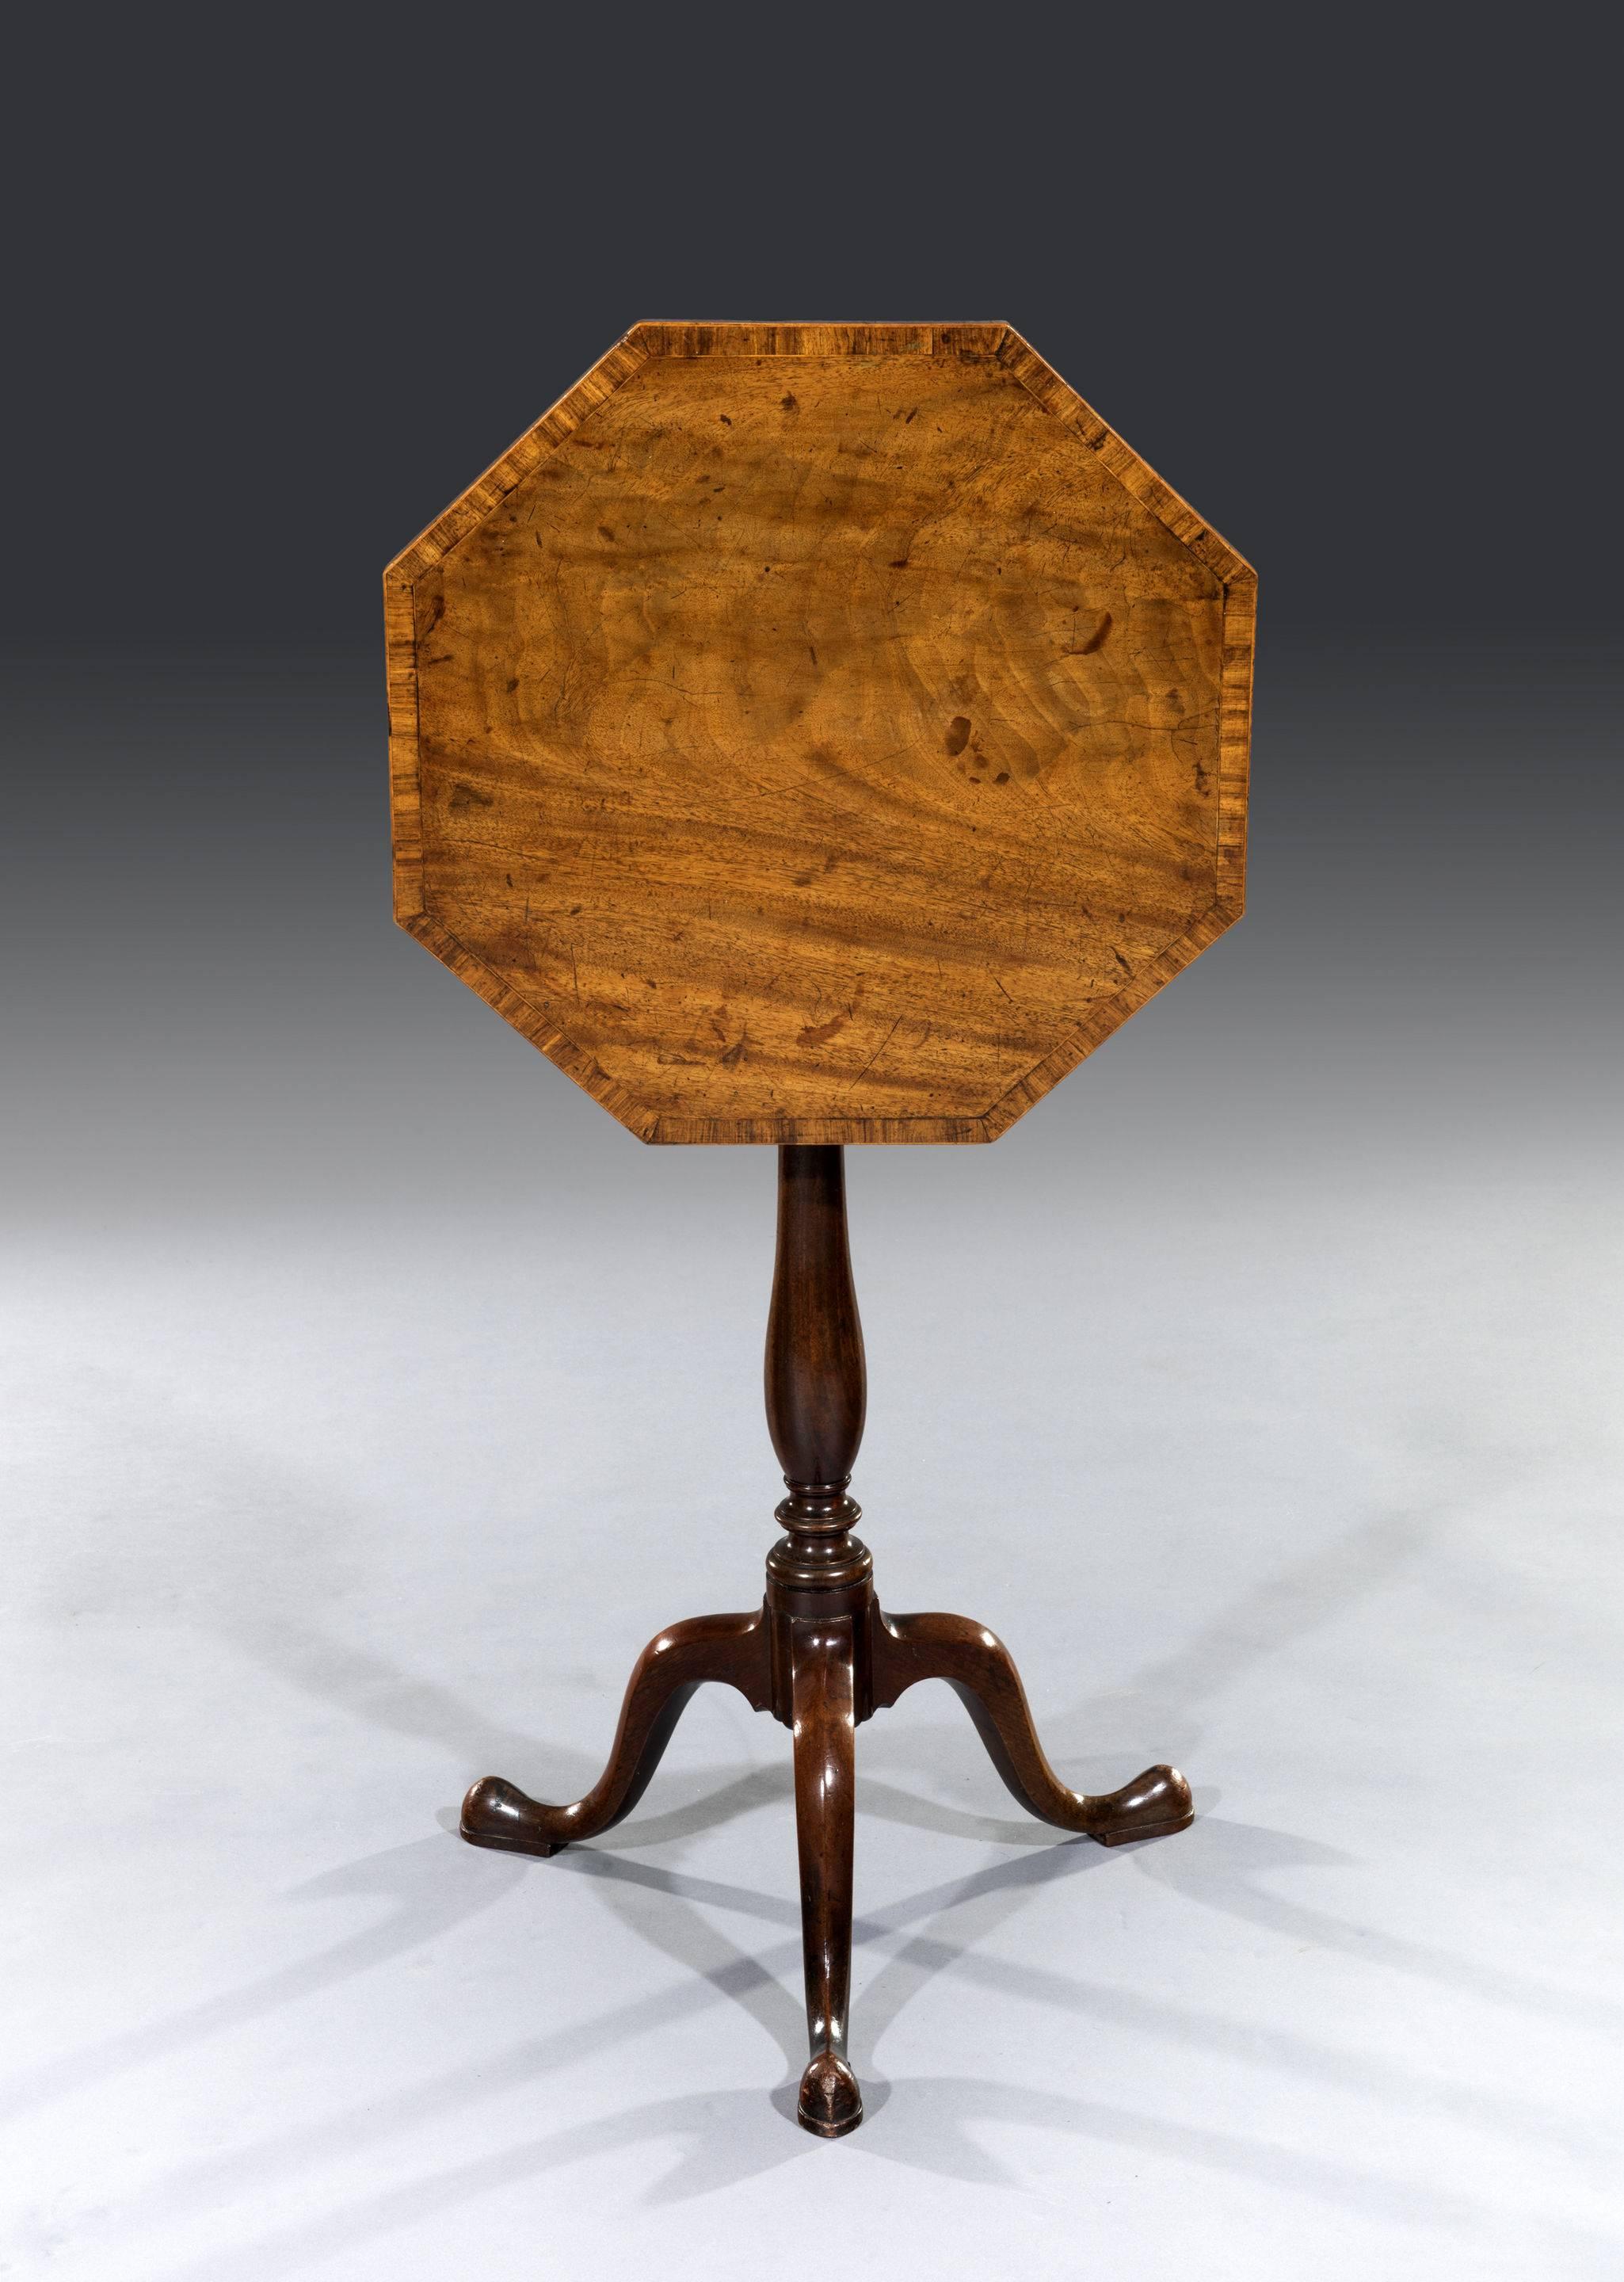 The faded flamed mahogany top is cross-banded in tulipwood and boxwood stringing and retains a great colour and patina. The tilt-top table sits on its original saddle and retains the original locking mechanism that keeps the table top locked down.